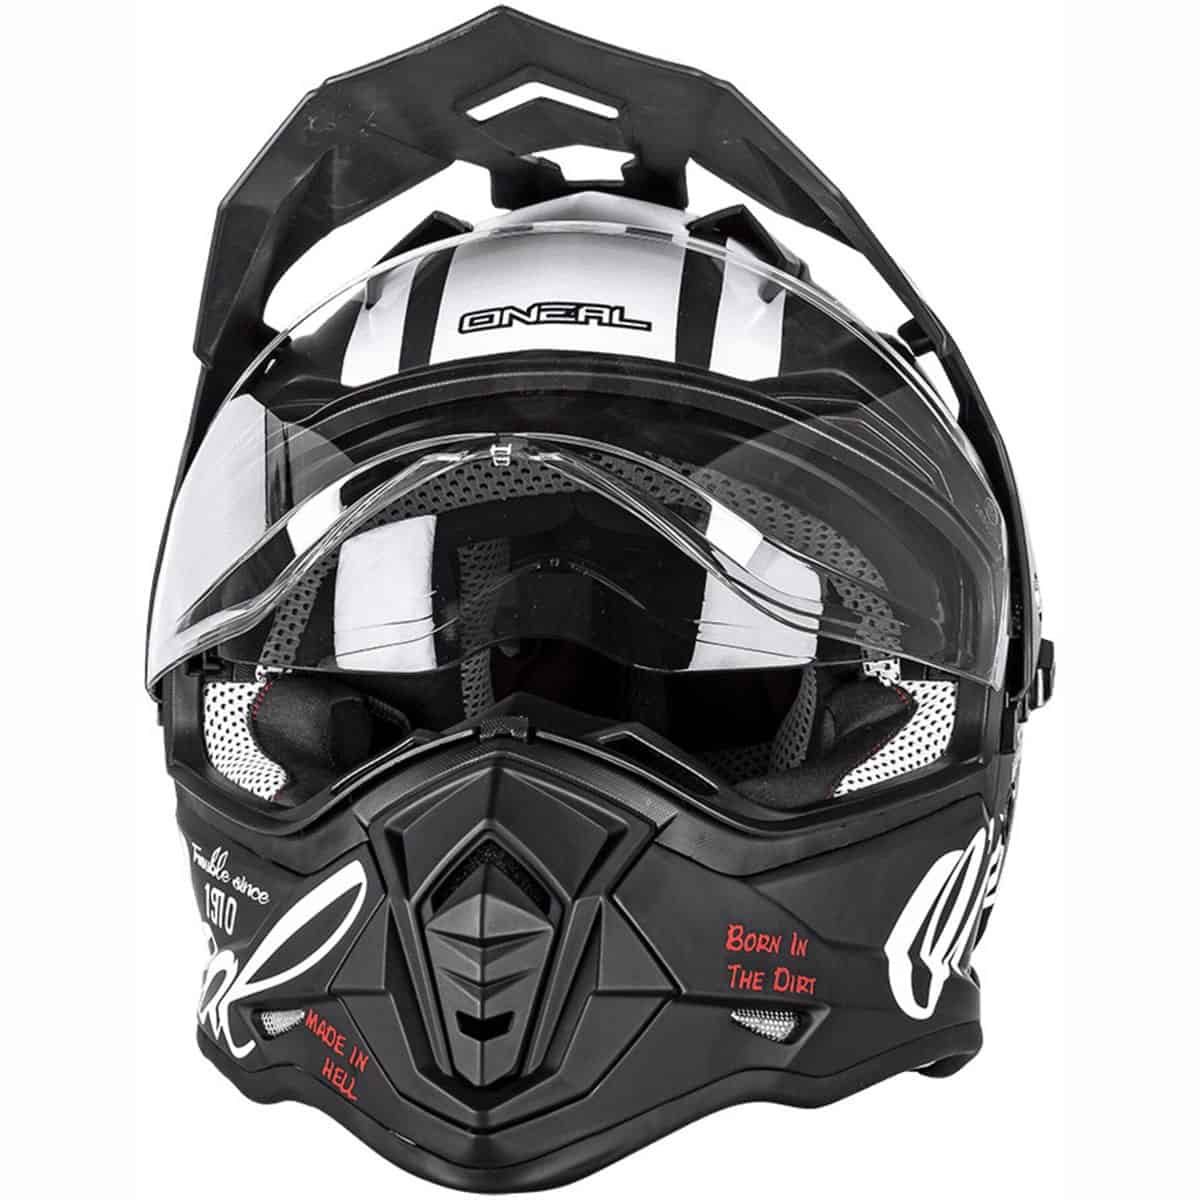 ONeal Sierra Adventure & Trail Helmet: "A great alternative to much more expensive options 2